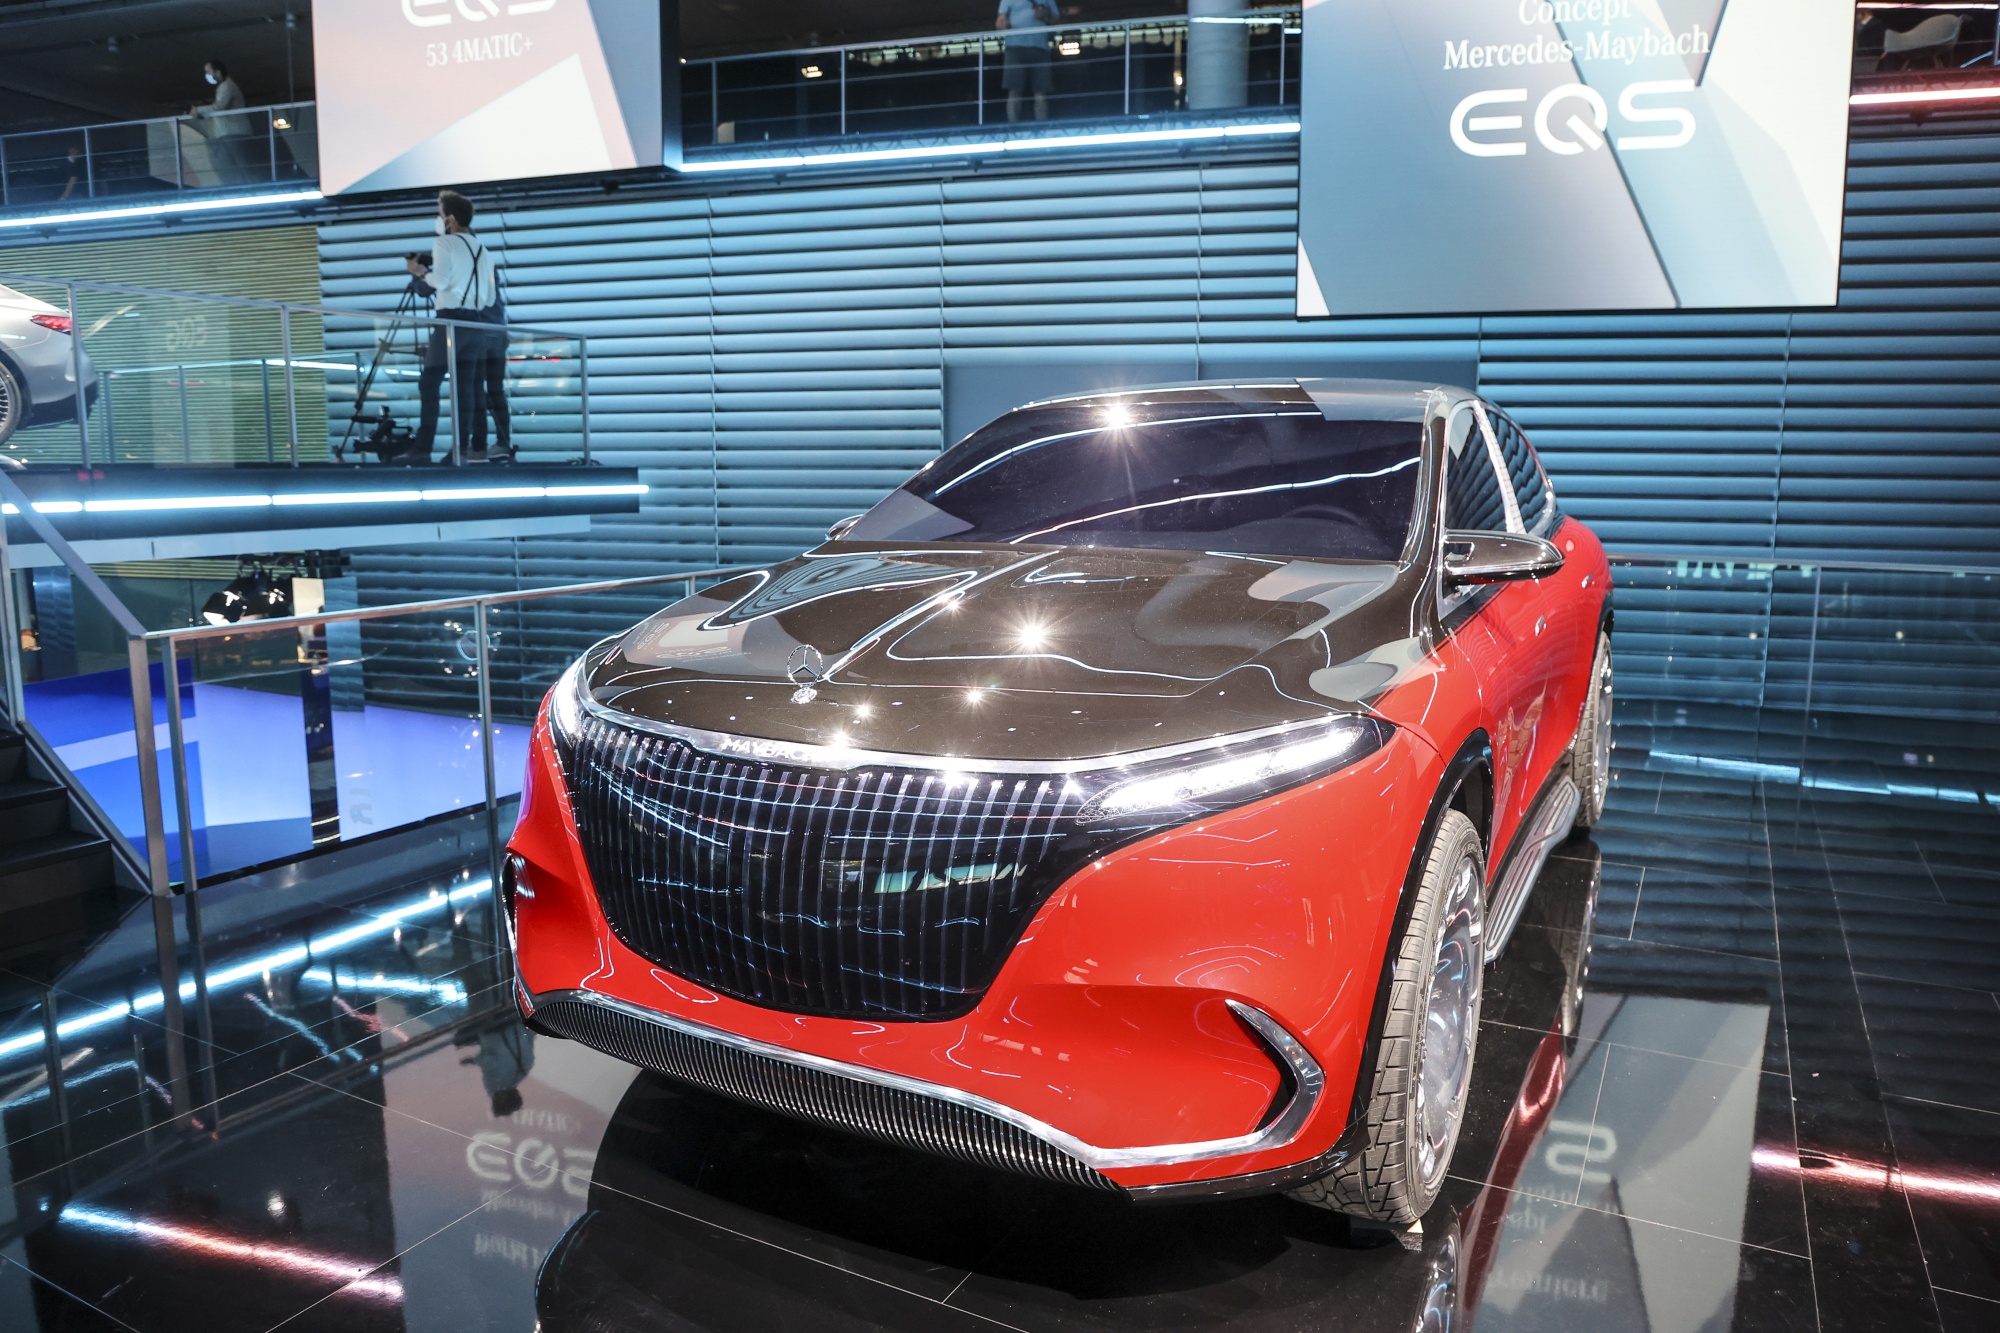 Maybach Electric Car Designed By Virgil Abloh Is Unveiled By Mercedes-Benz